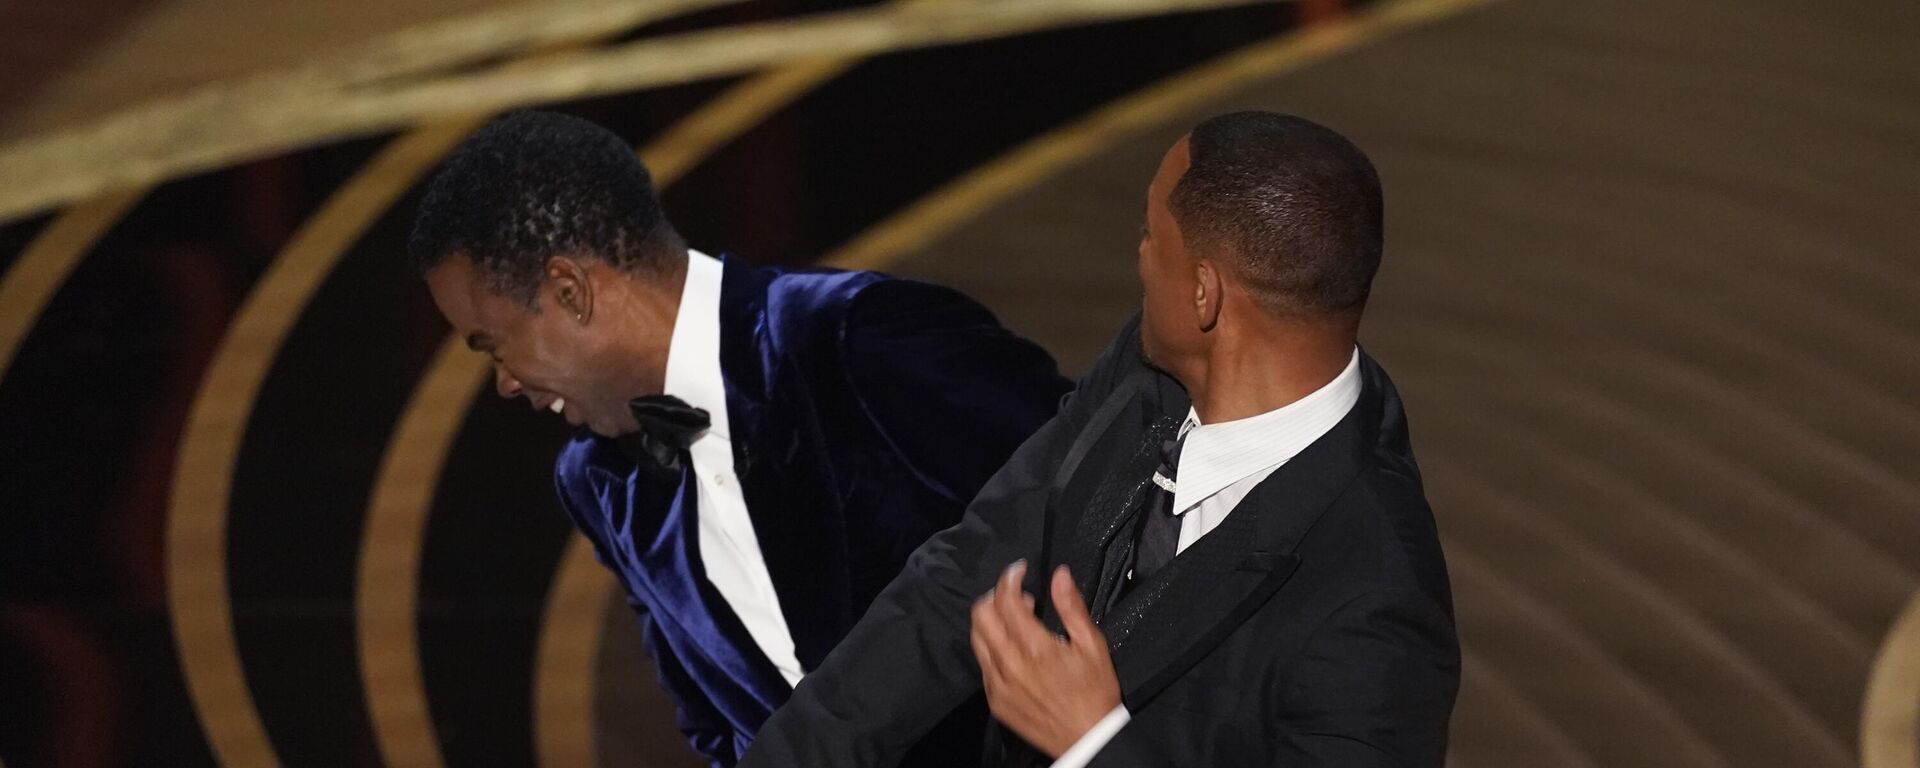 Will Smith, right, hits presenter Chris Rock on stage while presenting the award for best documentary feature at the Oscars on Sunday, March 27, 2022, at the Dolby Theatre in Los Angeles. - Sputnik International, 1920, 23.02.2023